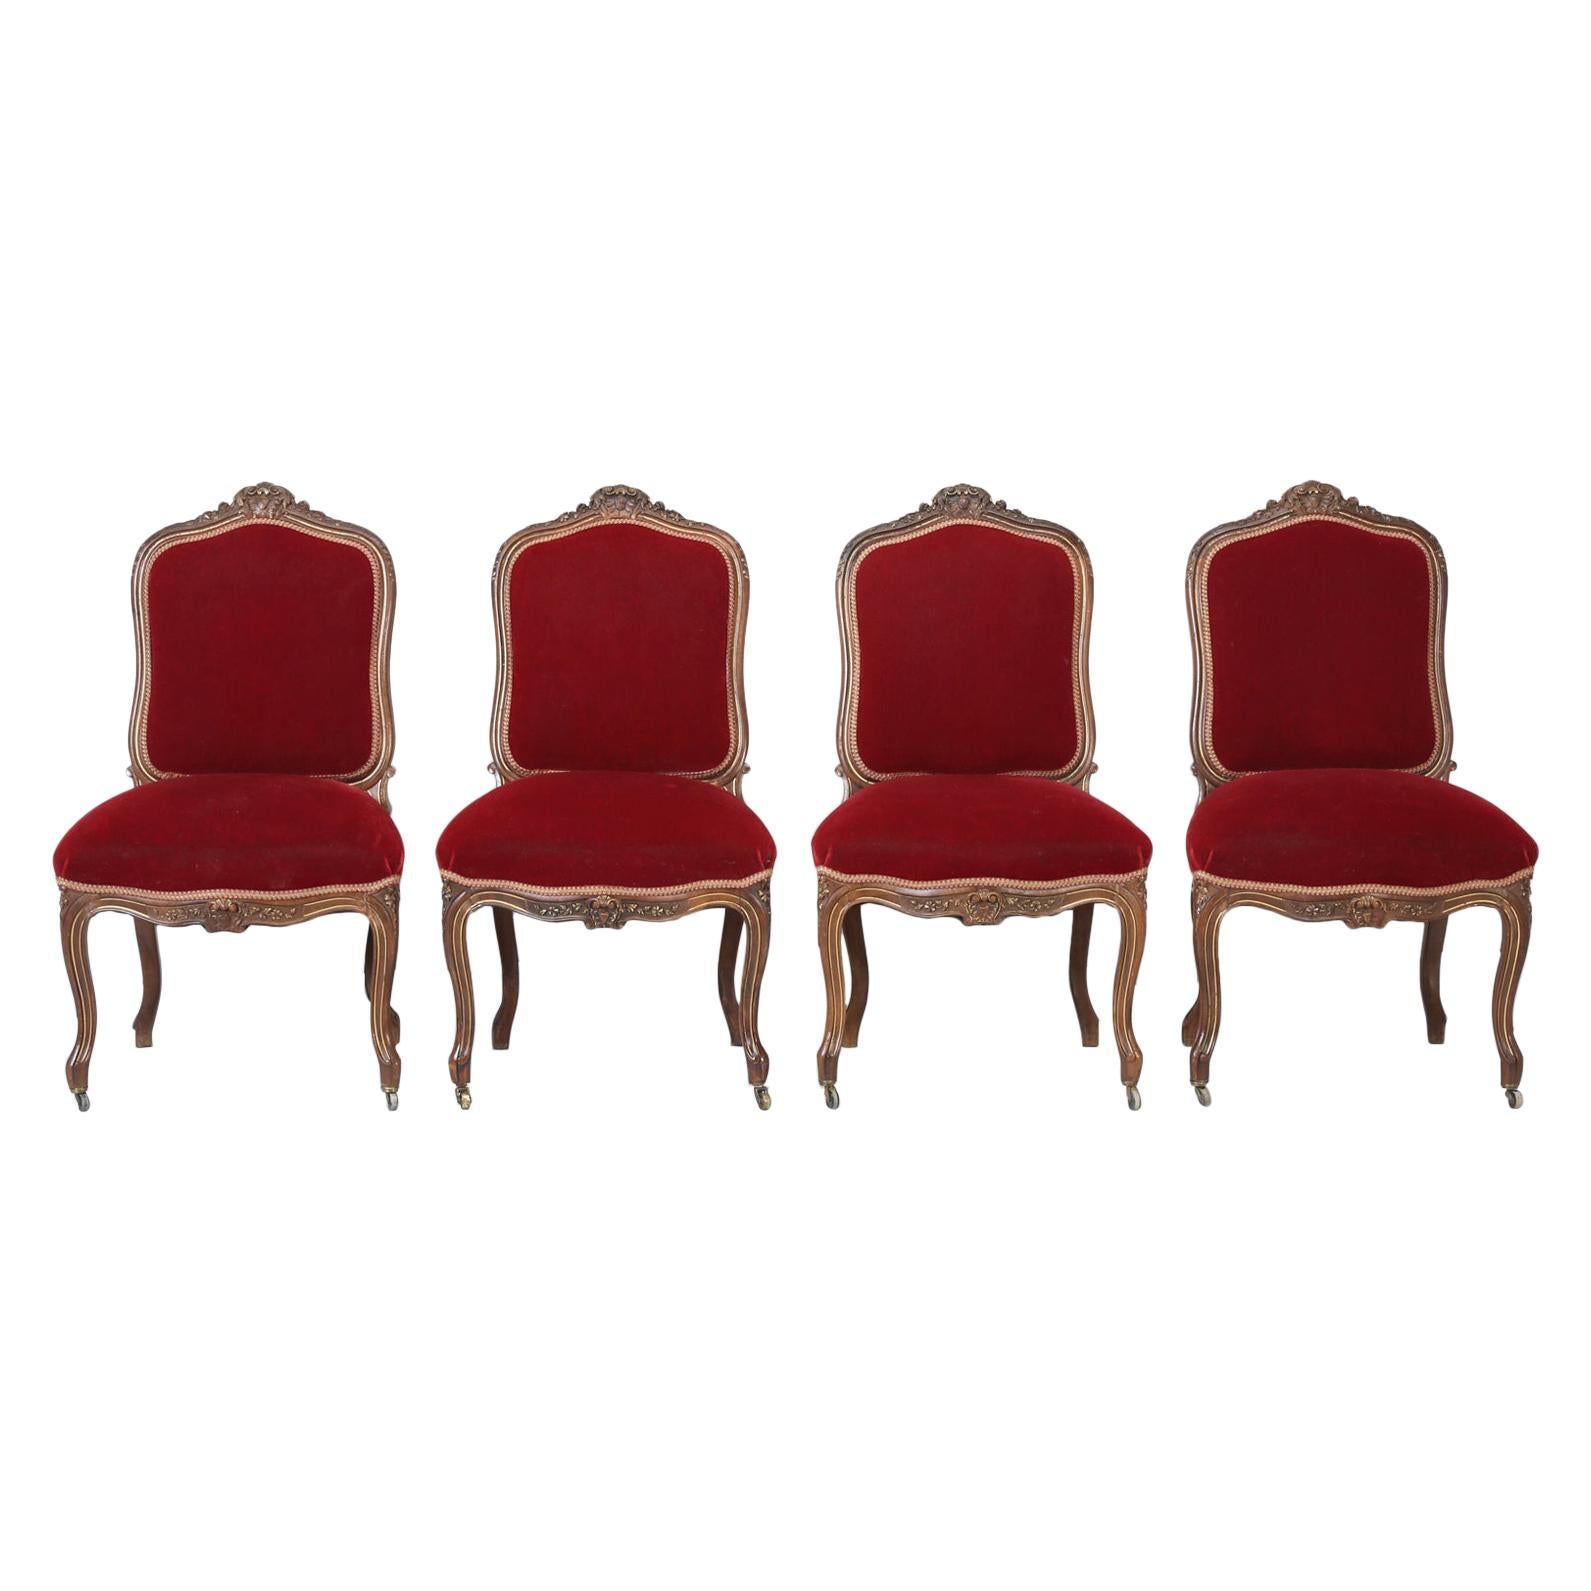 Suite of '4' Antique Italian Carved Walnut Side Chairs from a Parlor Suite